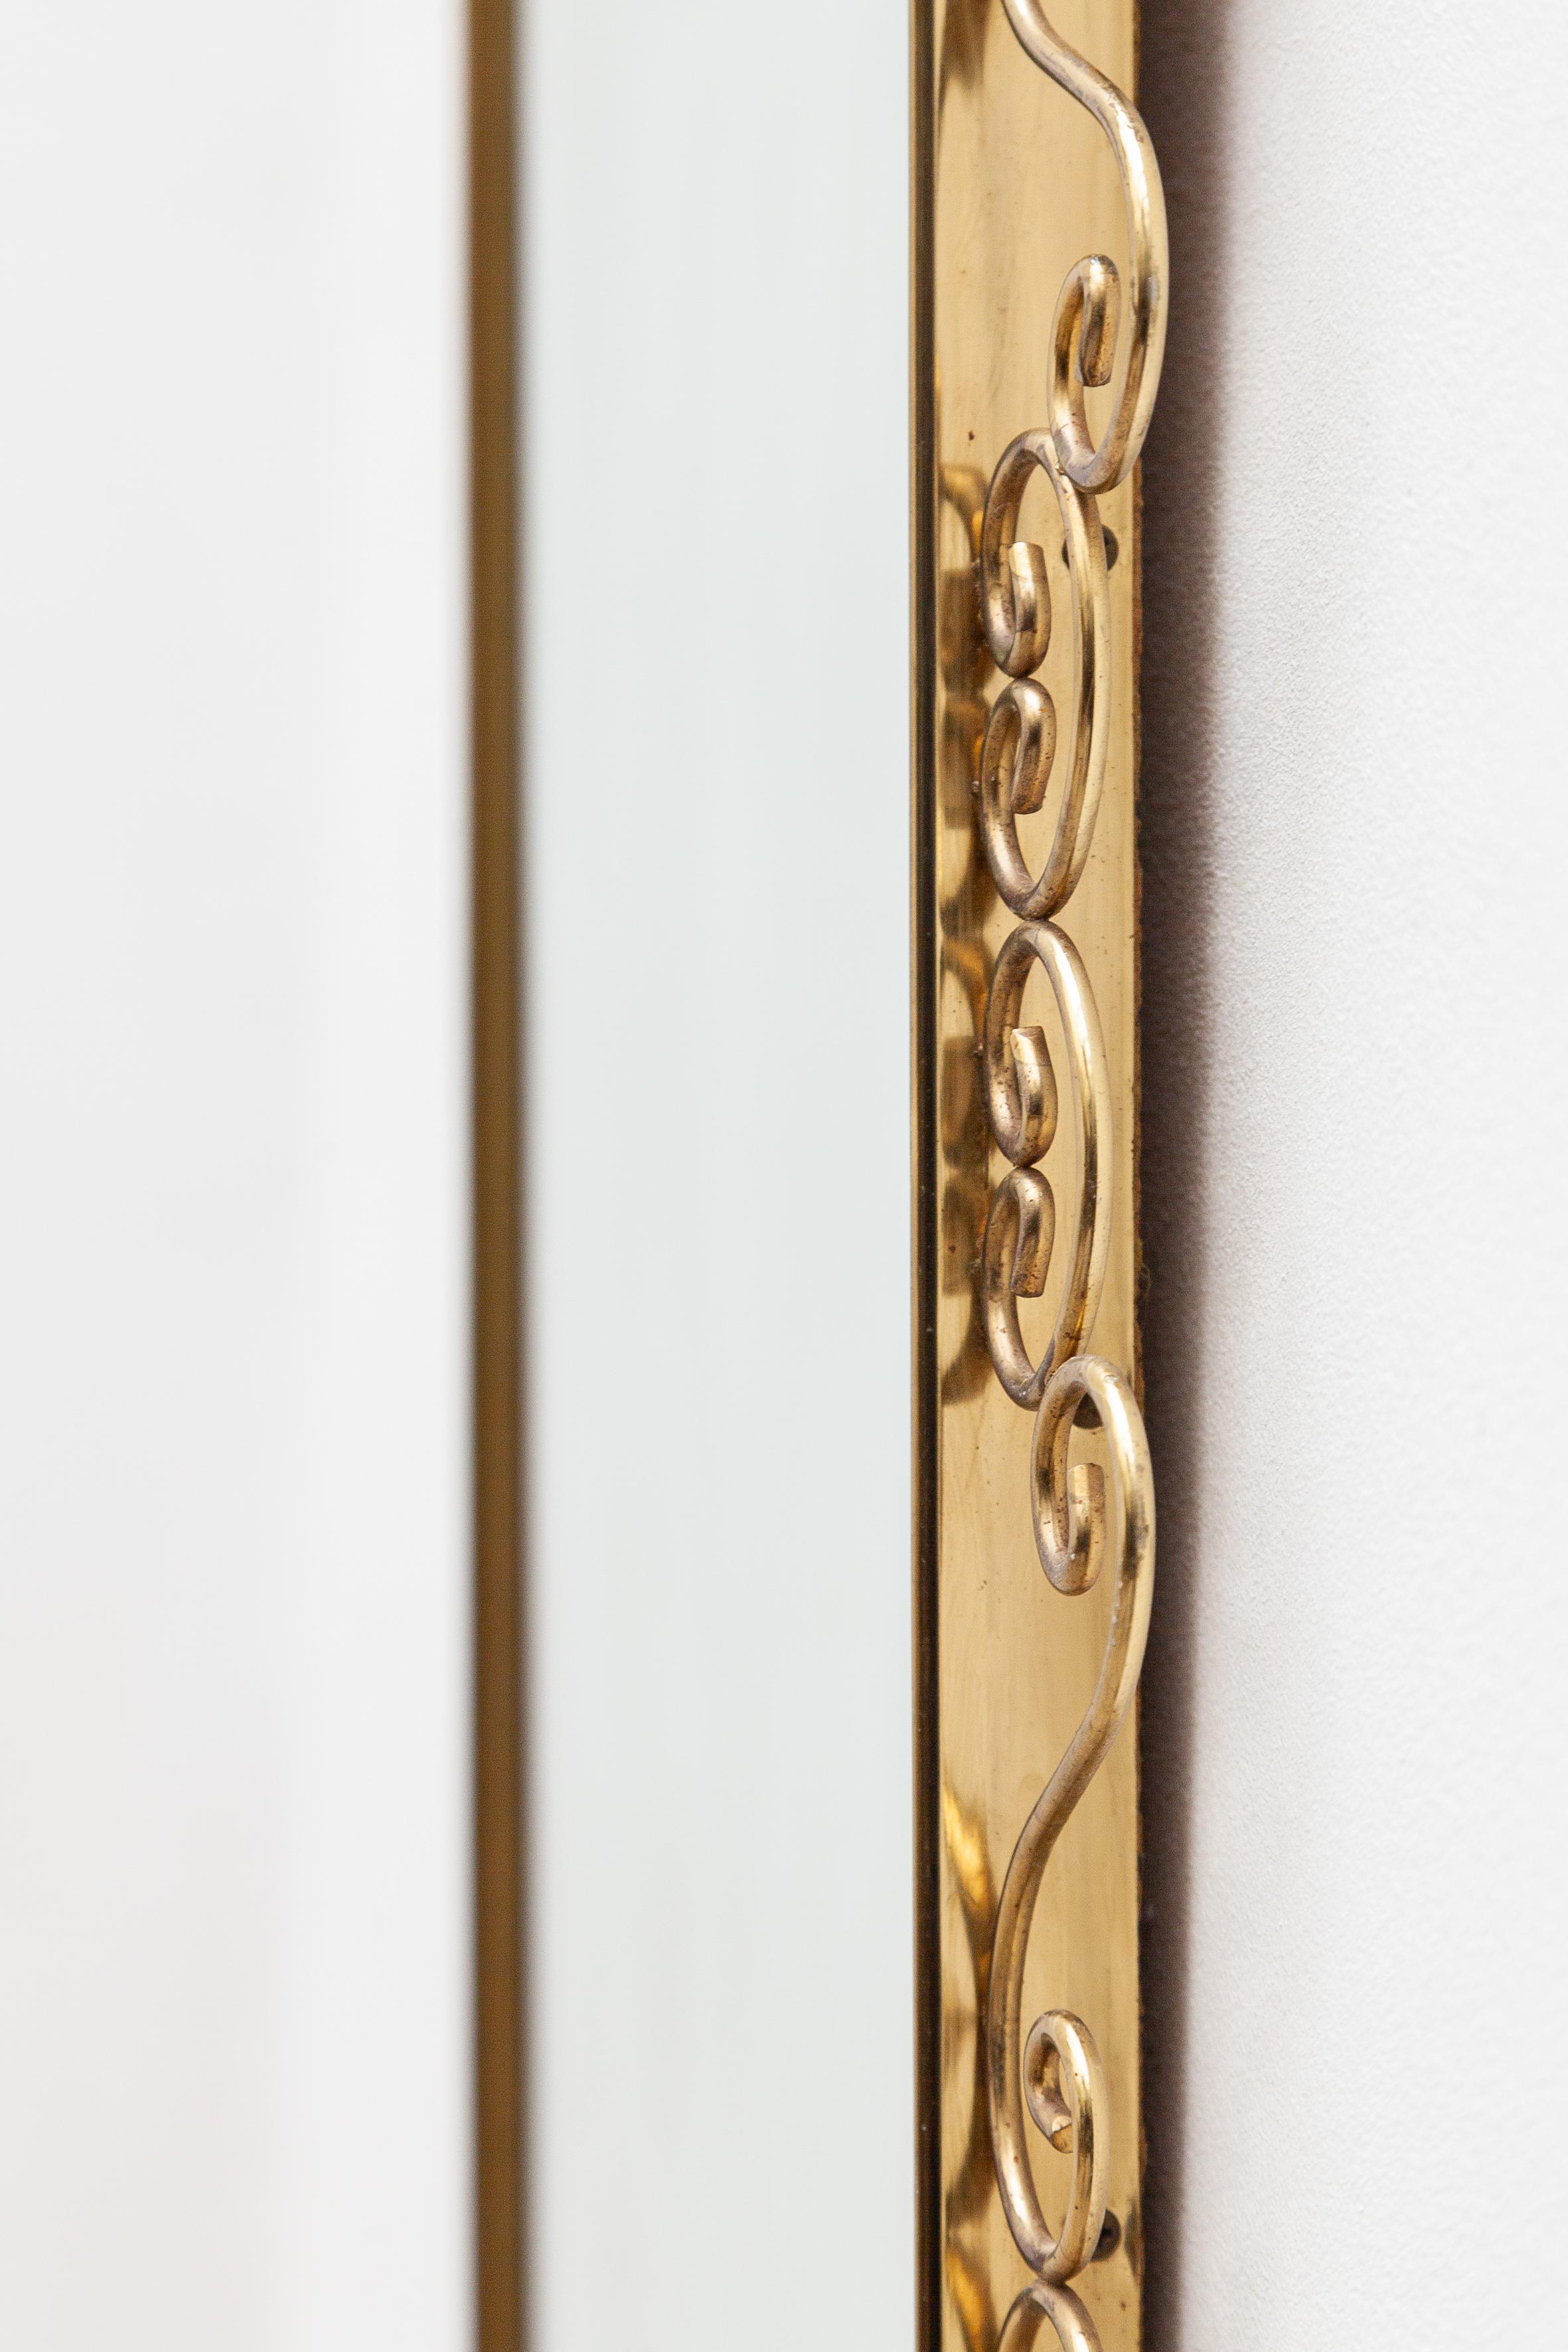 Mid-20th Century Italian Brass Wired Sculptural Loop Wall Mirror, 1950s For Sale